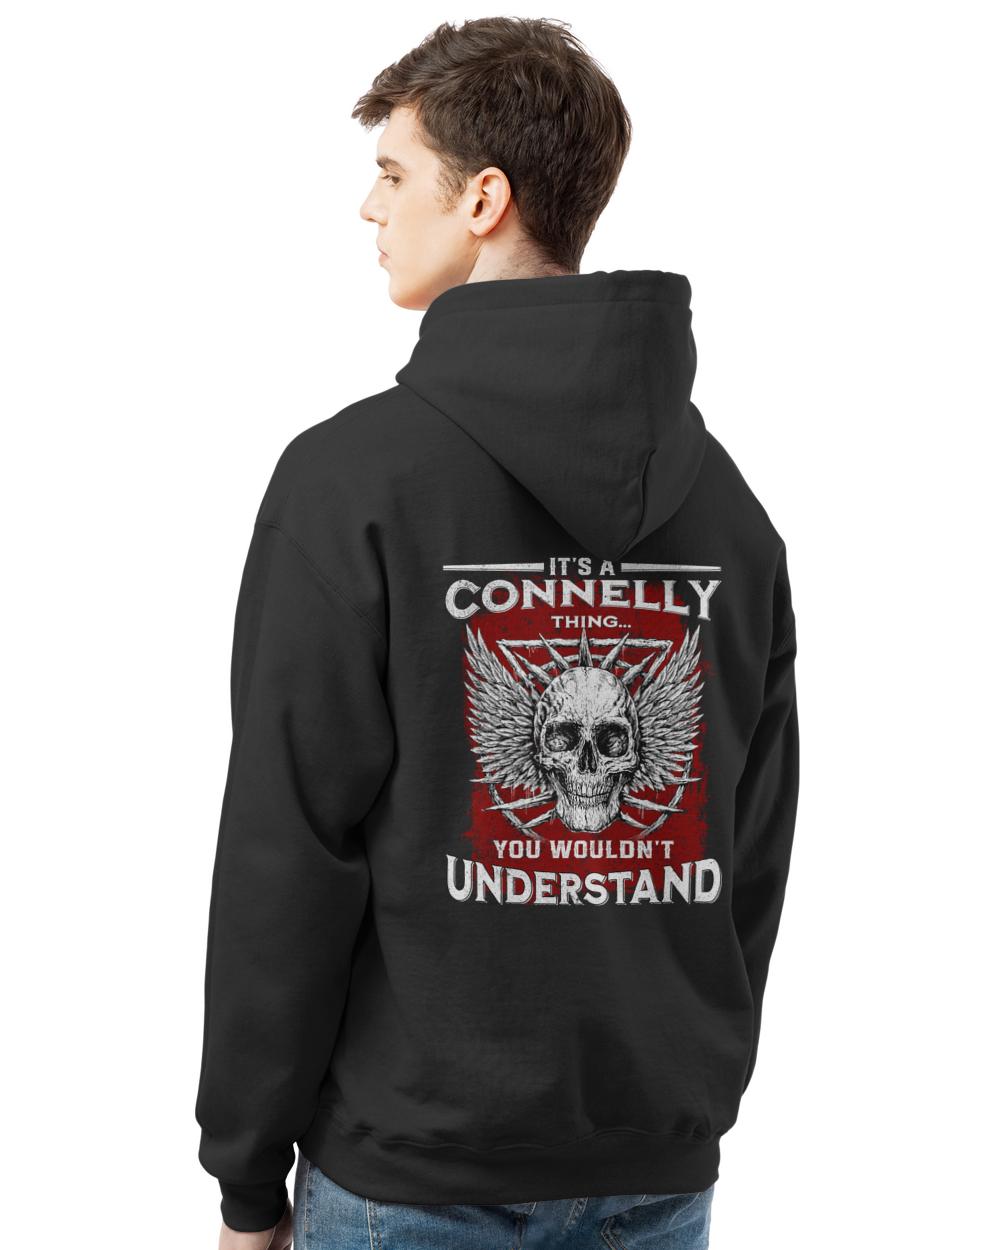 CONNELLY-13K-42-01